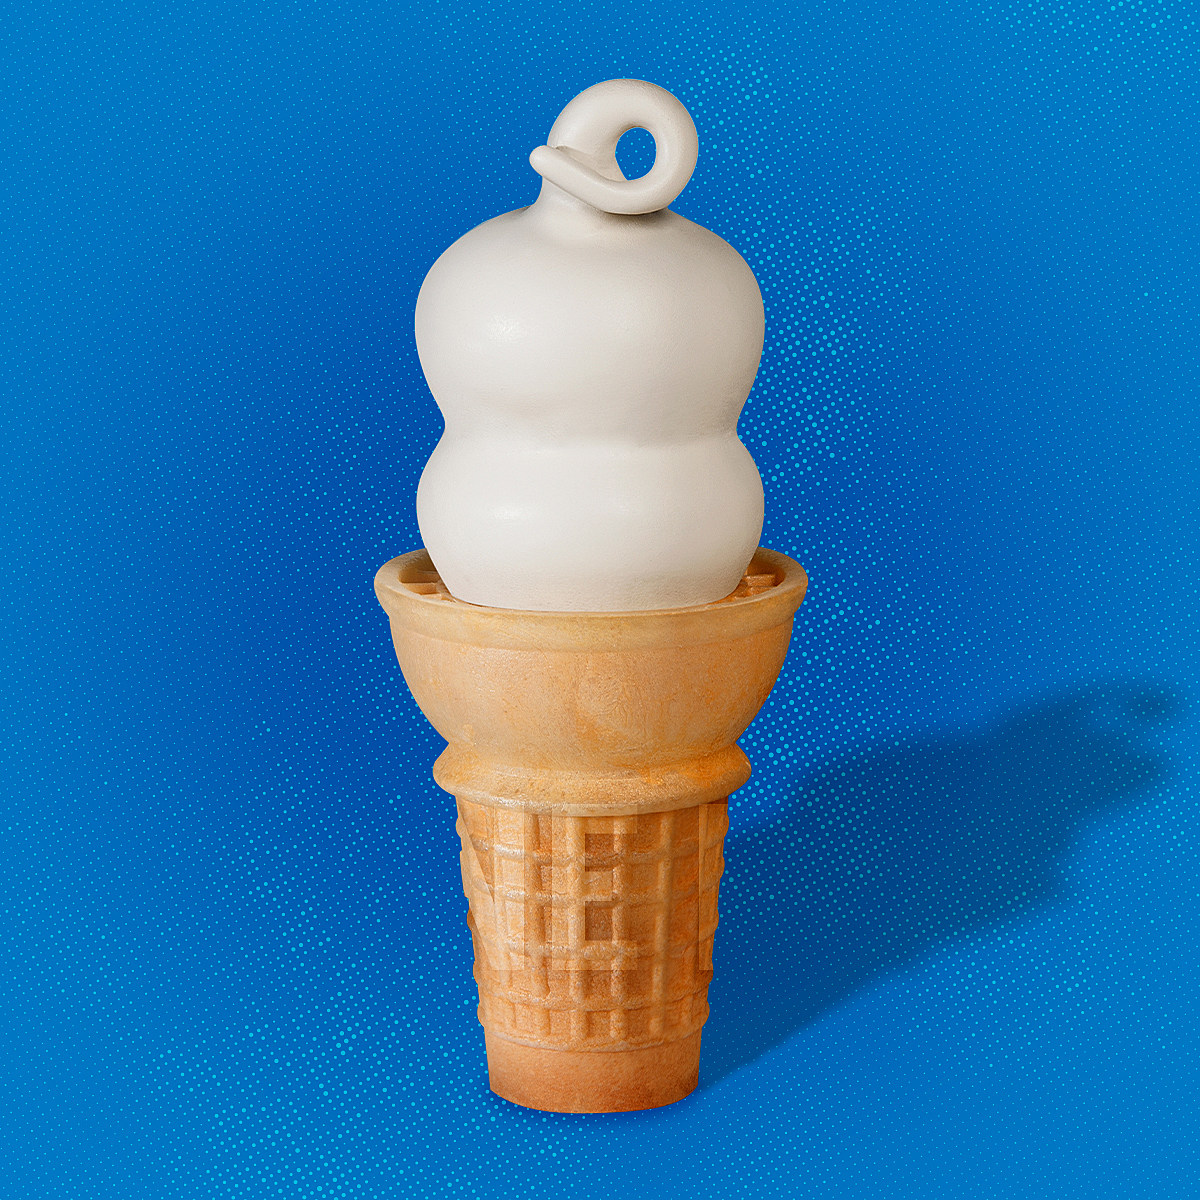 Get A Free Small Cone At Dairy Queen On First Day of Spring!